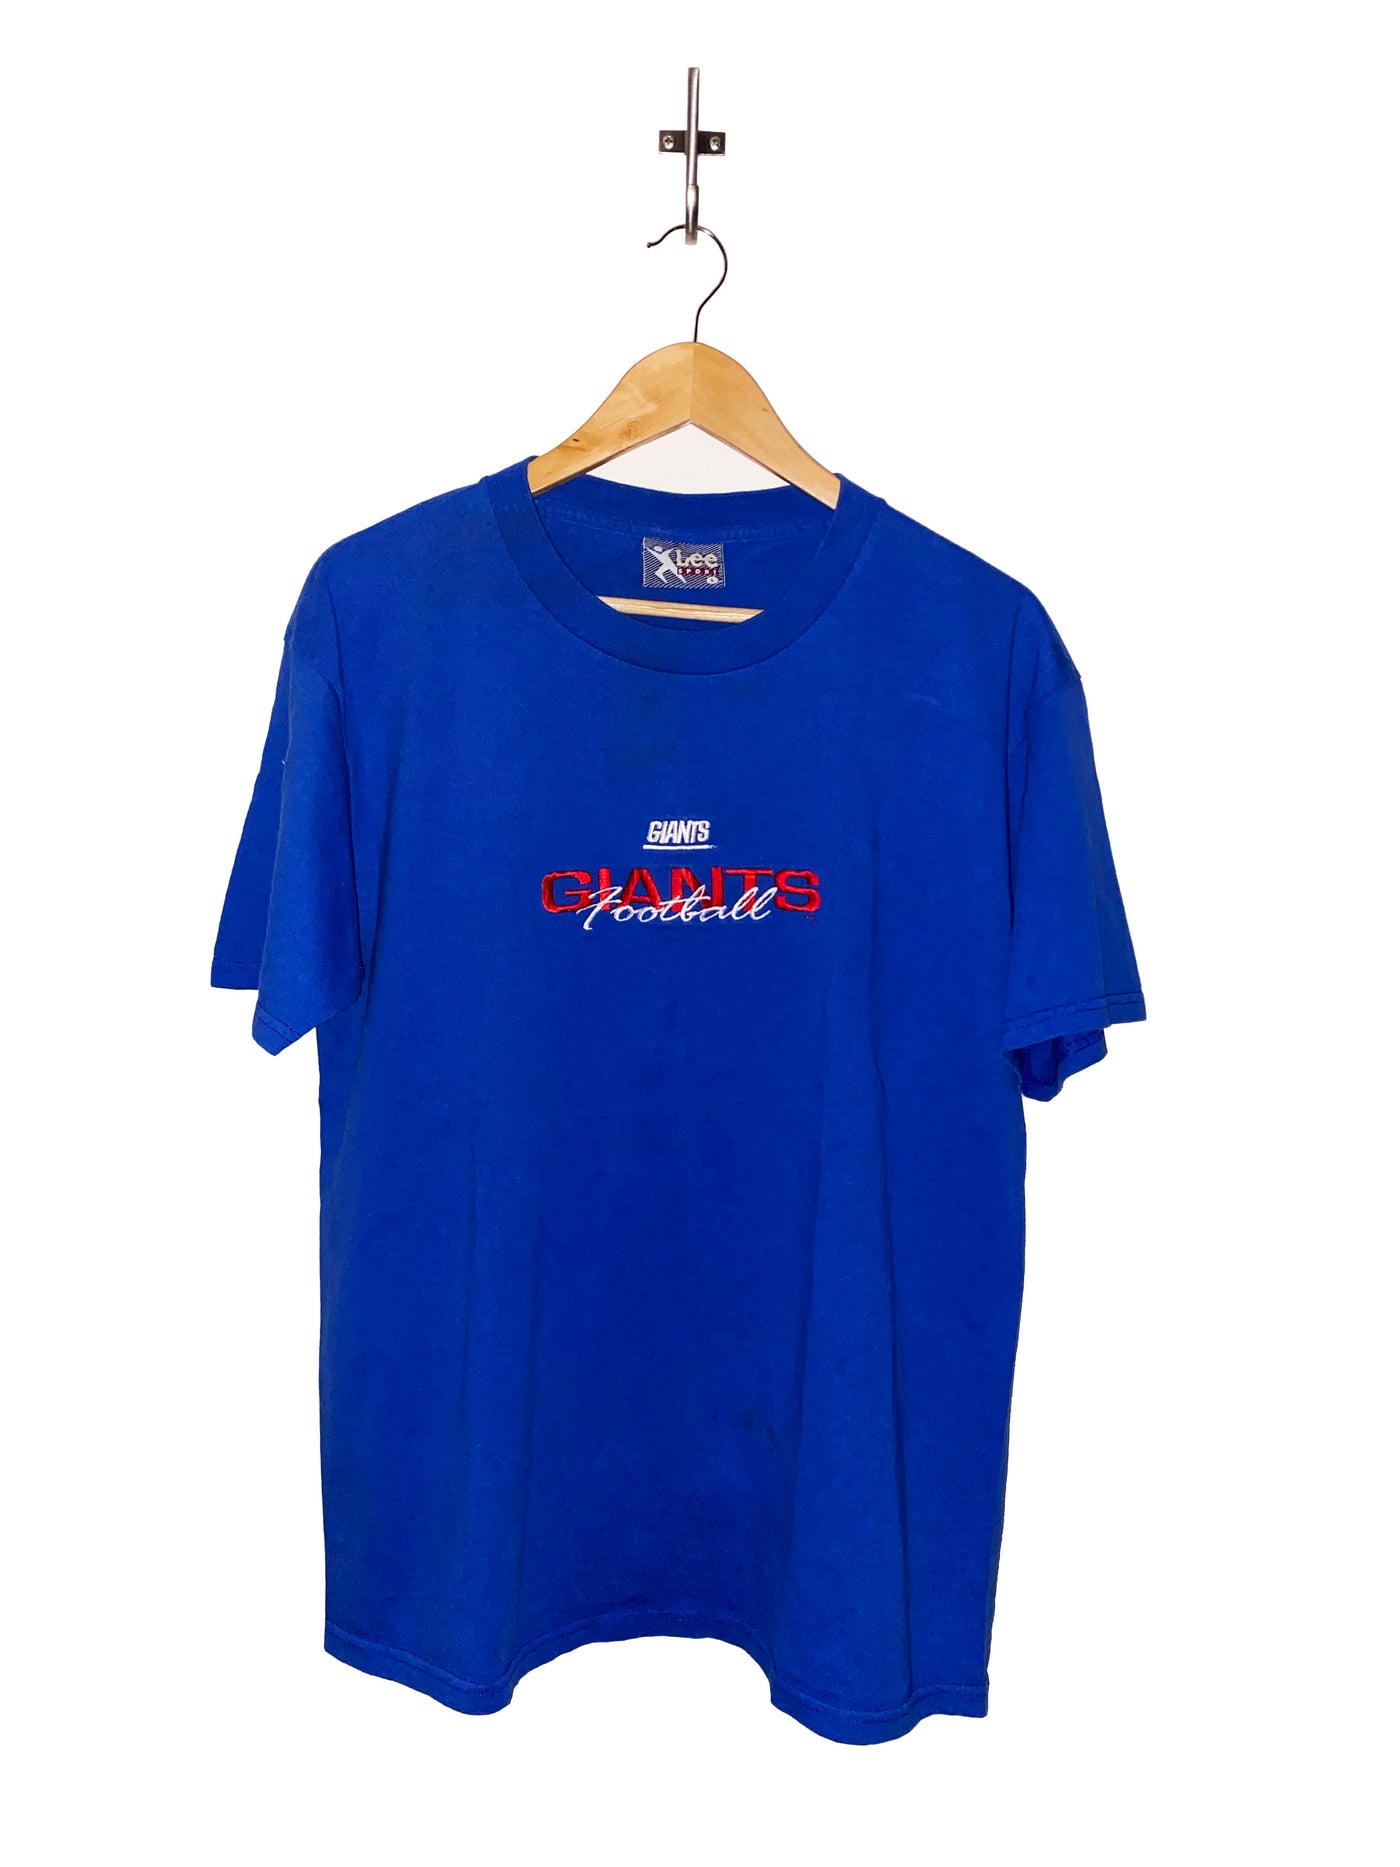 Vintage Giants Embroidered T-Shirt